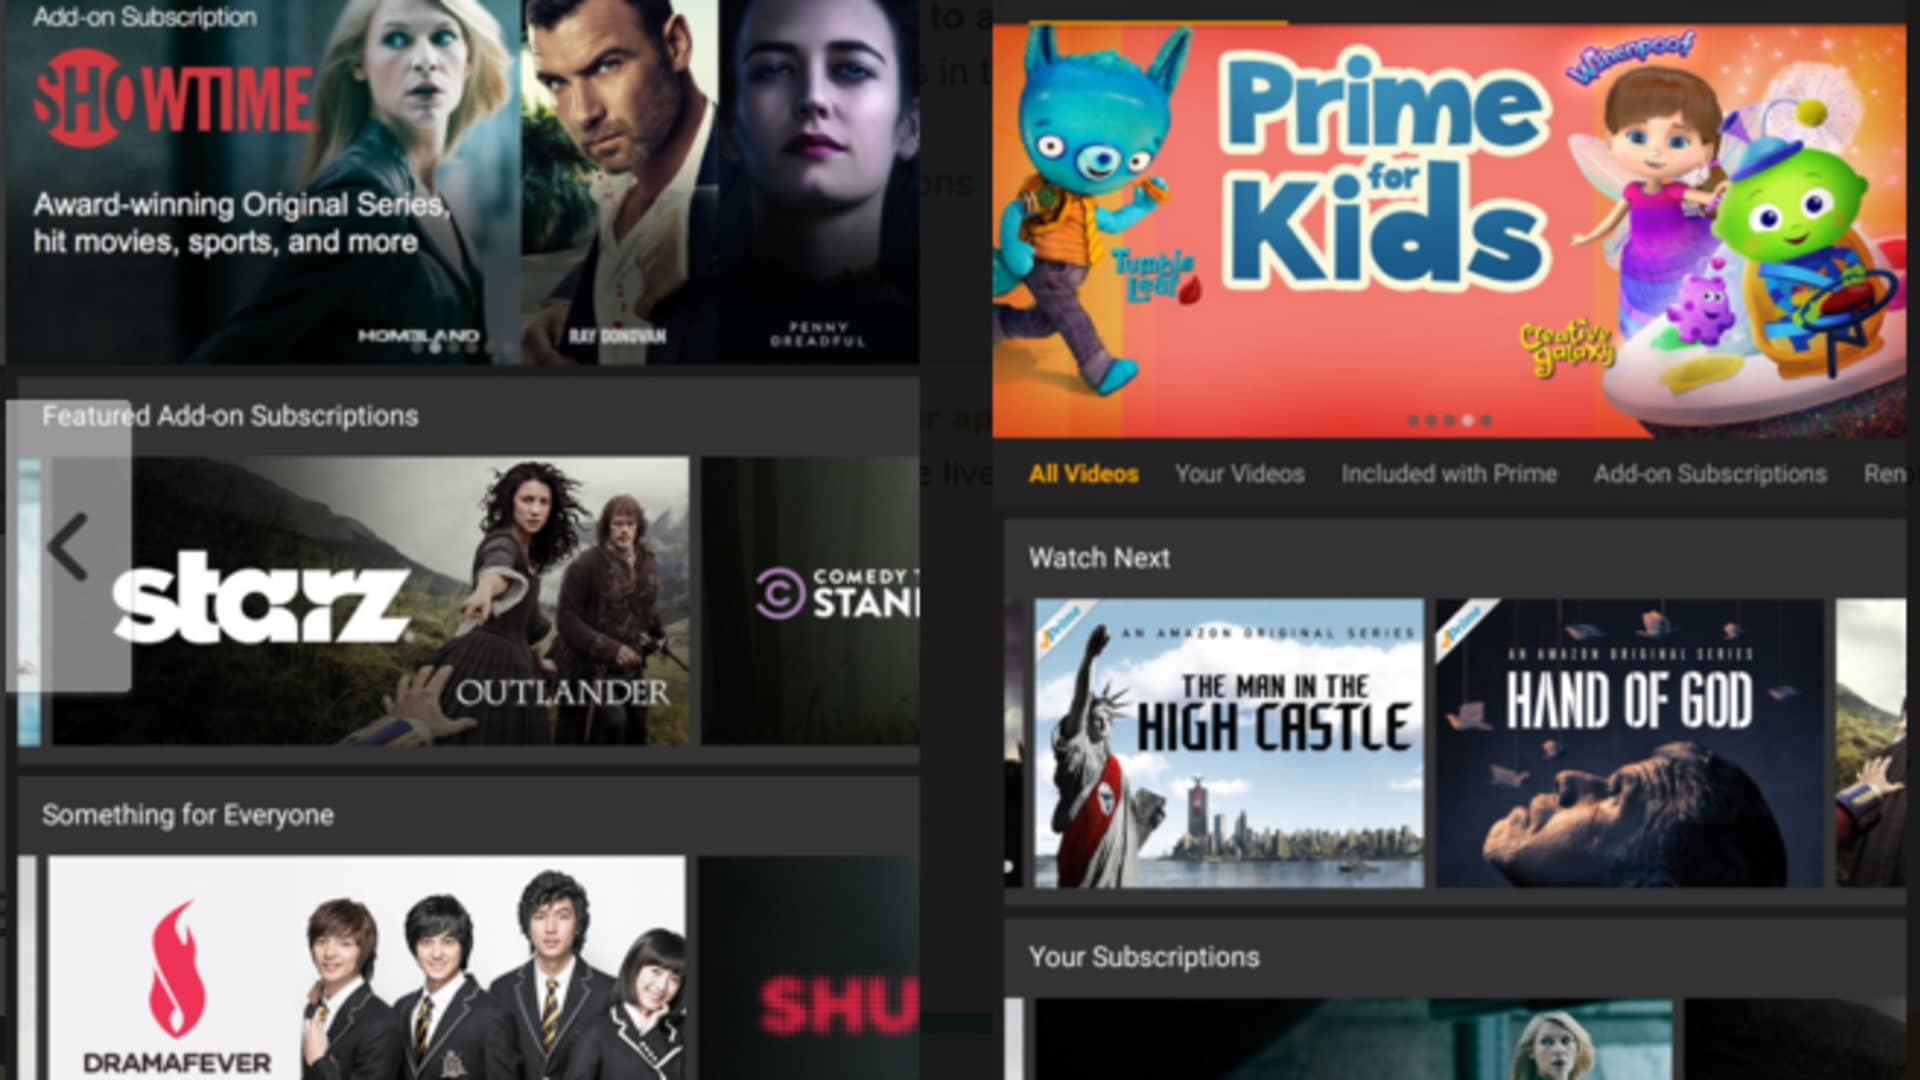 is using Prime Video to get users to sign up for  Prime